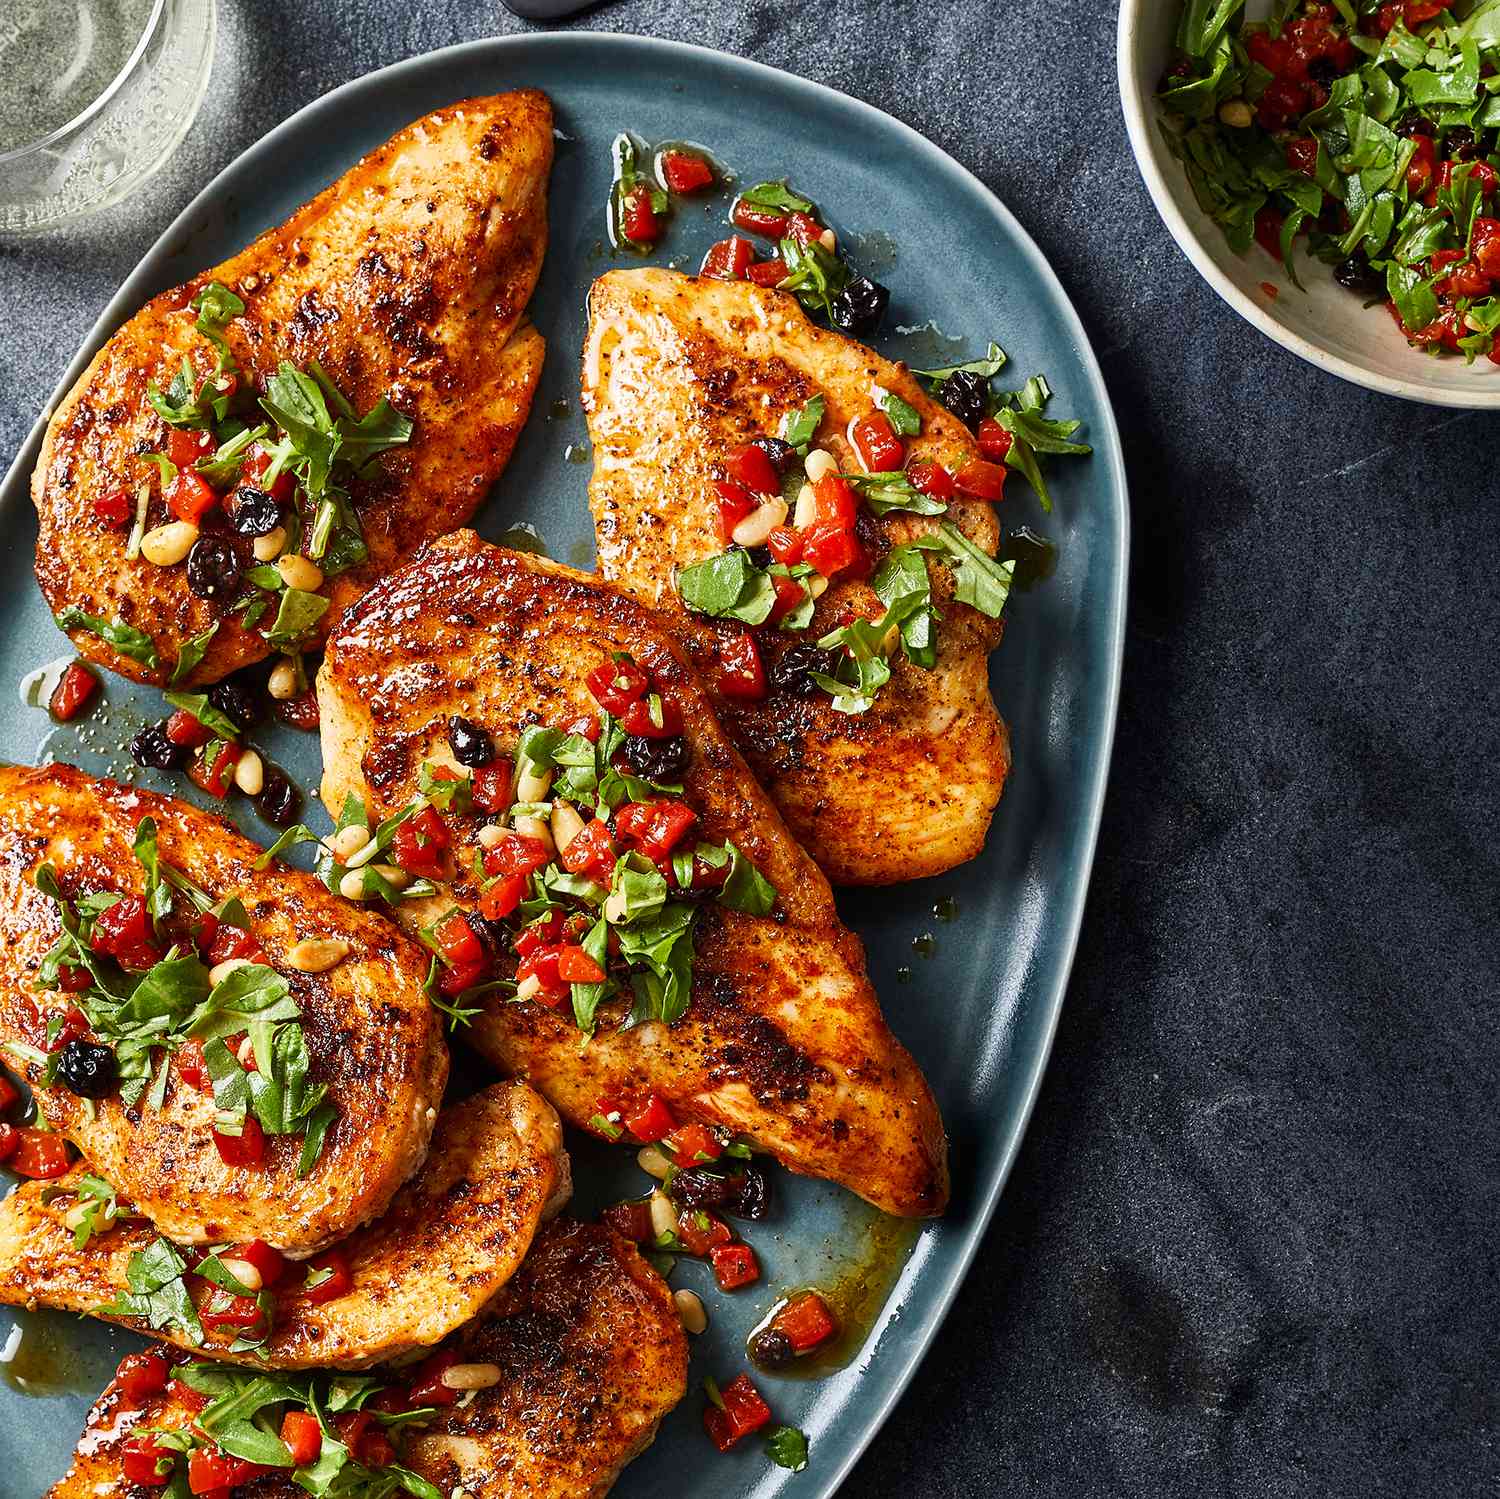 Chicken Cutlets with Roasted Red Pepper & Arugula Relish